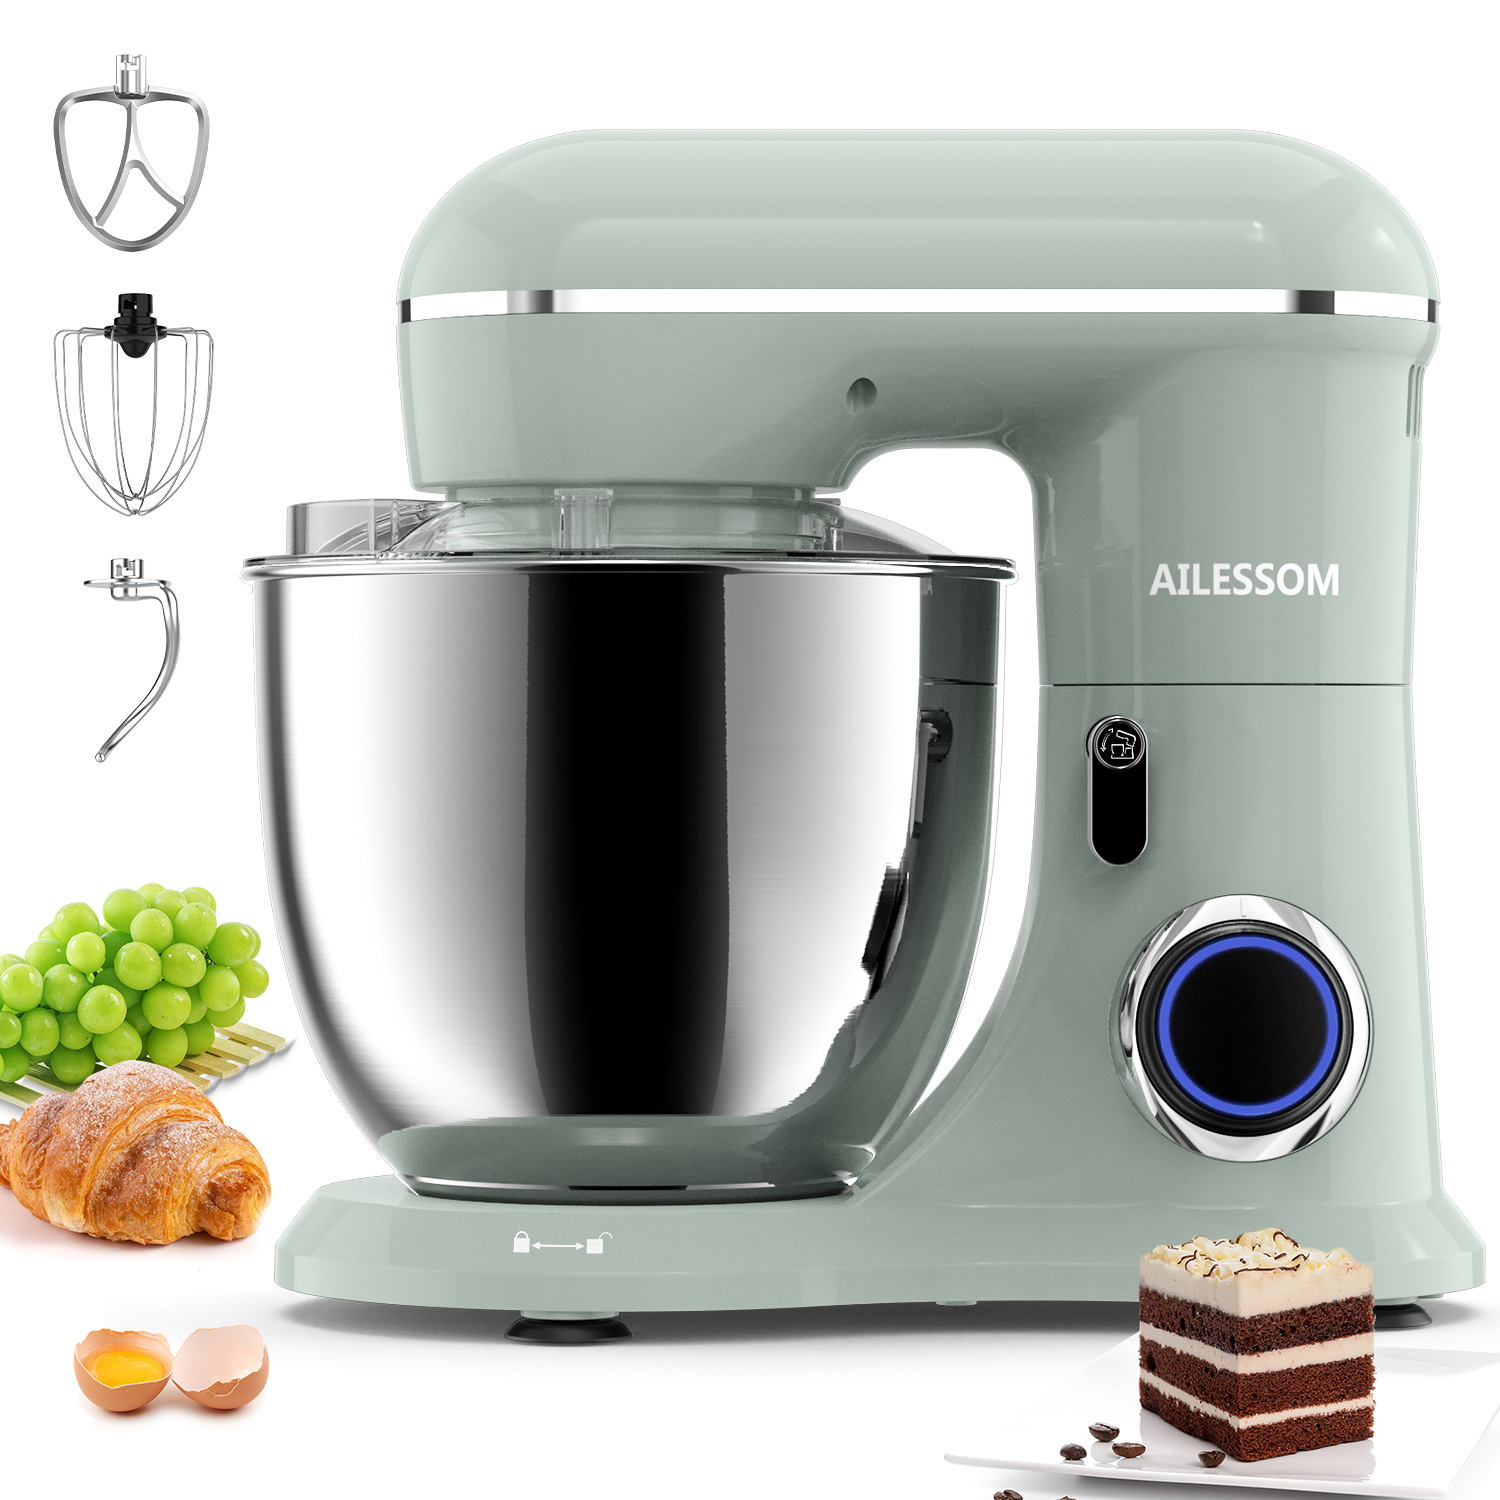 Ailessom Stand Mixer,6.5-QT 660W 10-Speed Tilt-Head Food Mixer, Kitchen Electric Mixer with  Bowl, Dough Hook, Beater, Whisk for Most Home Cooks, (6.5QT, Morandi Green) - image 1 of 7